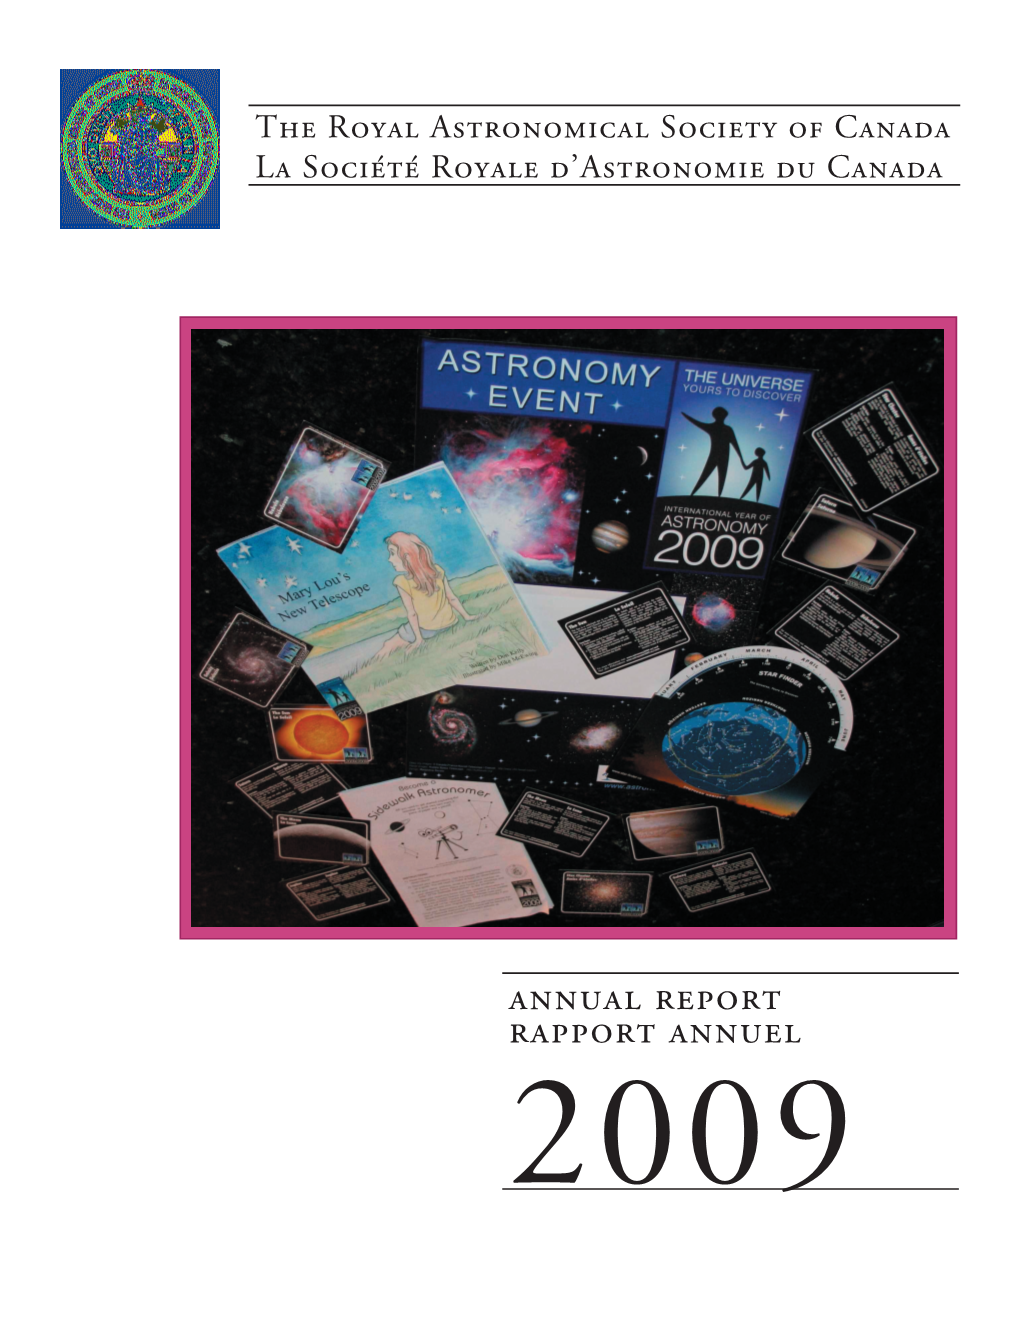 Annual Report Rapport Annuel 2009 Table of Contents